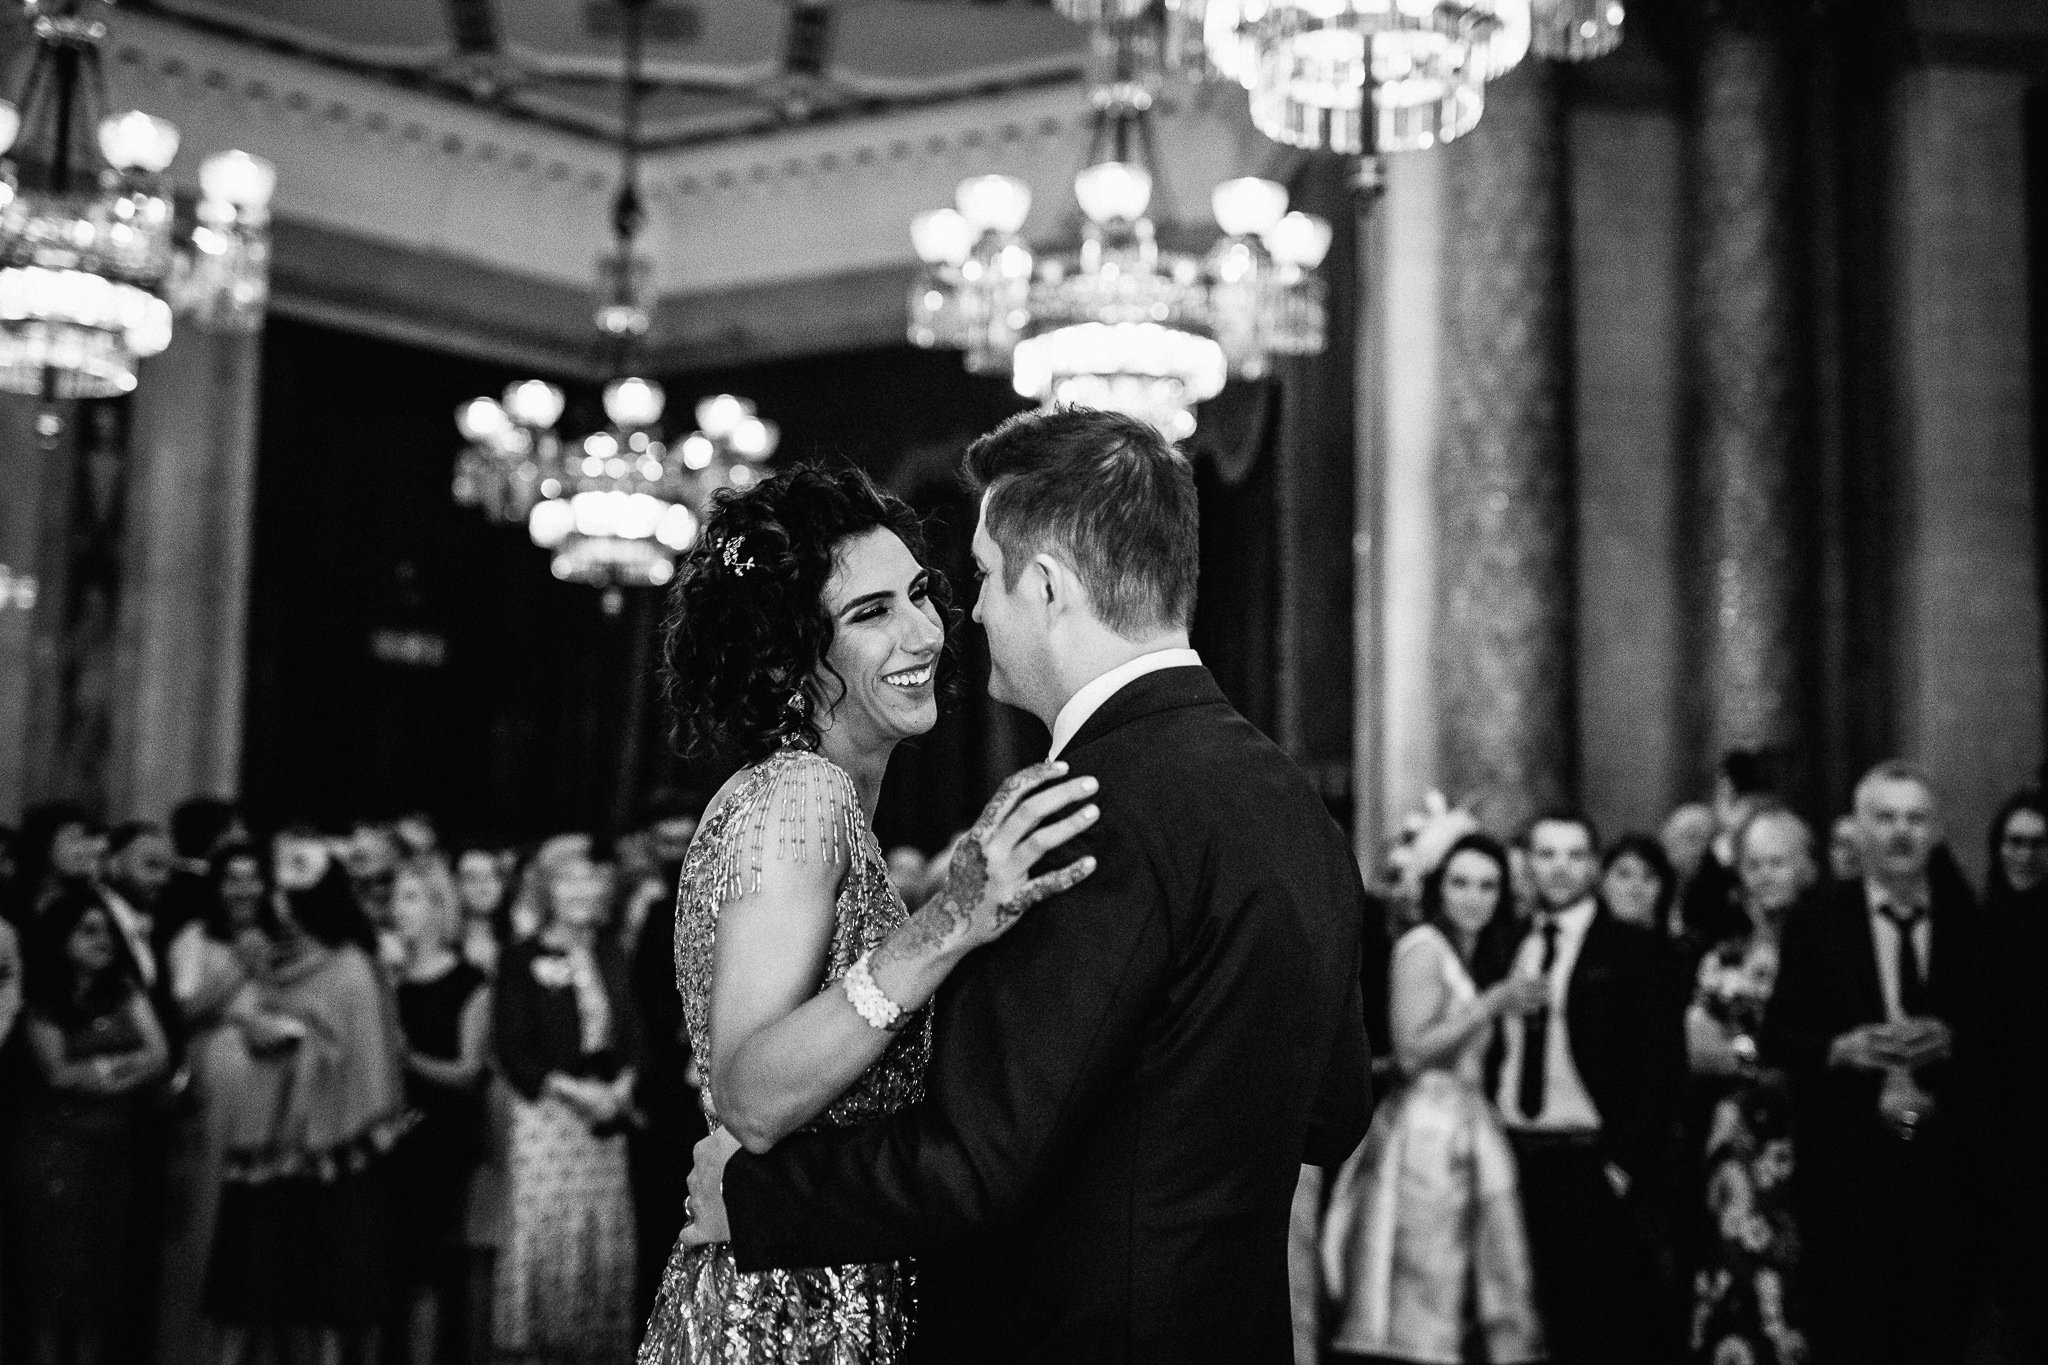  First dance at One Whitehall Place London 